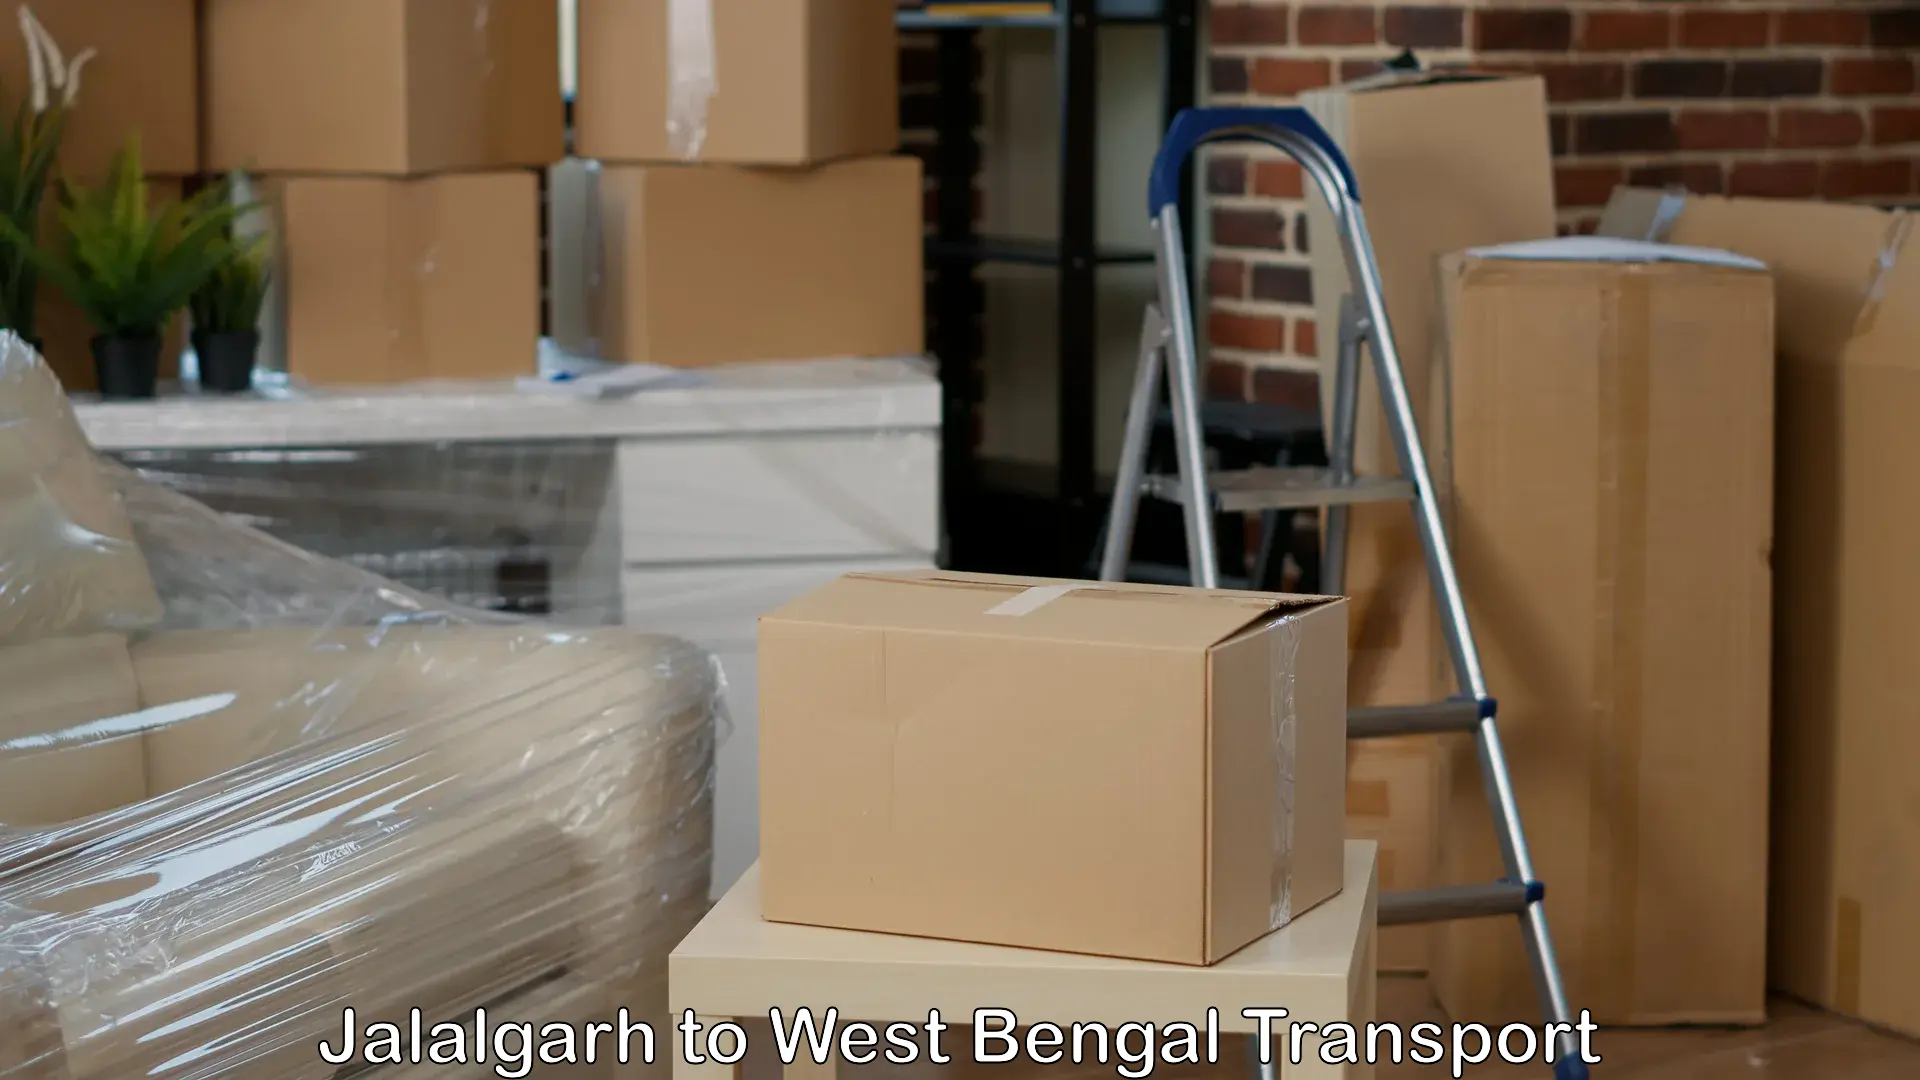 Air freight transport services in Jalalgarh to Budge Budge